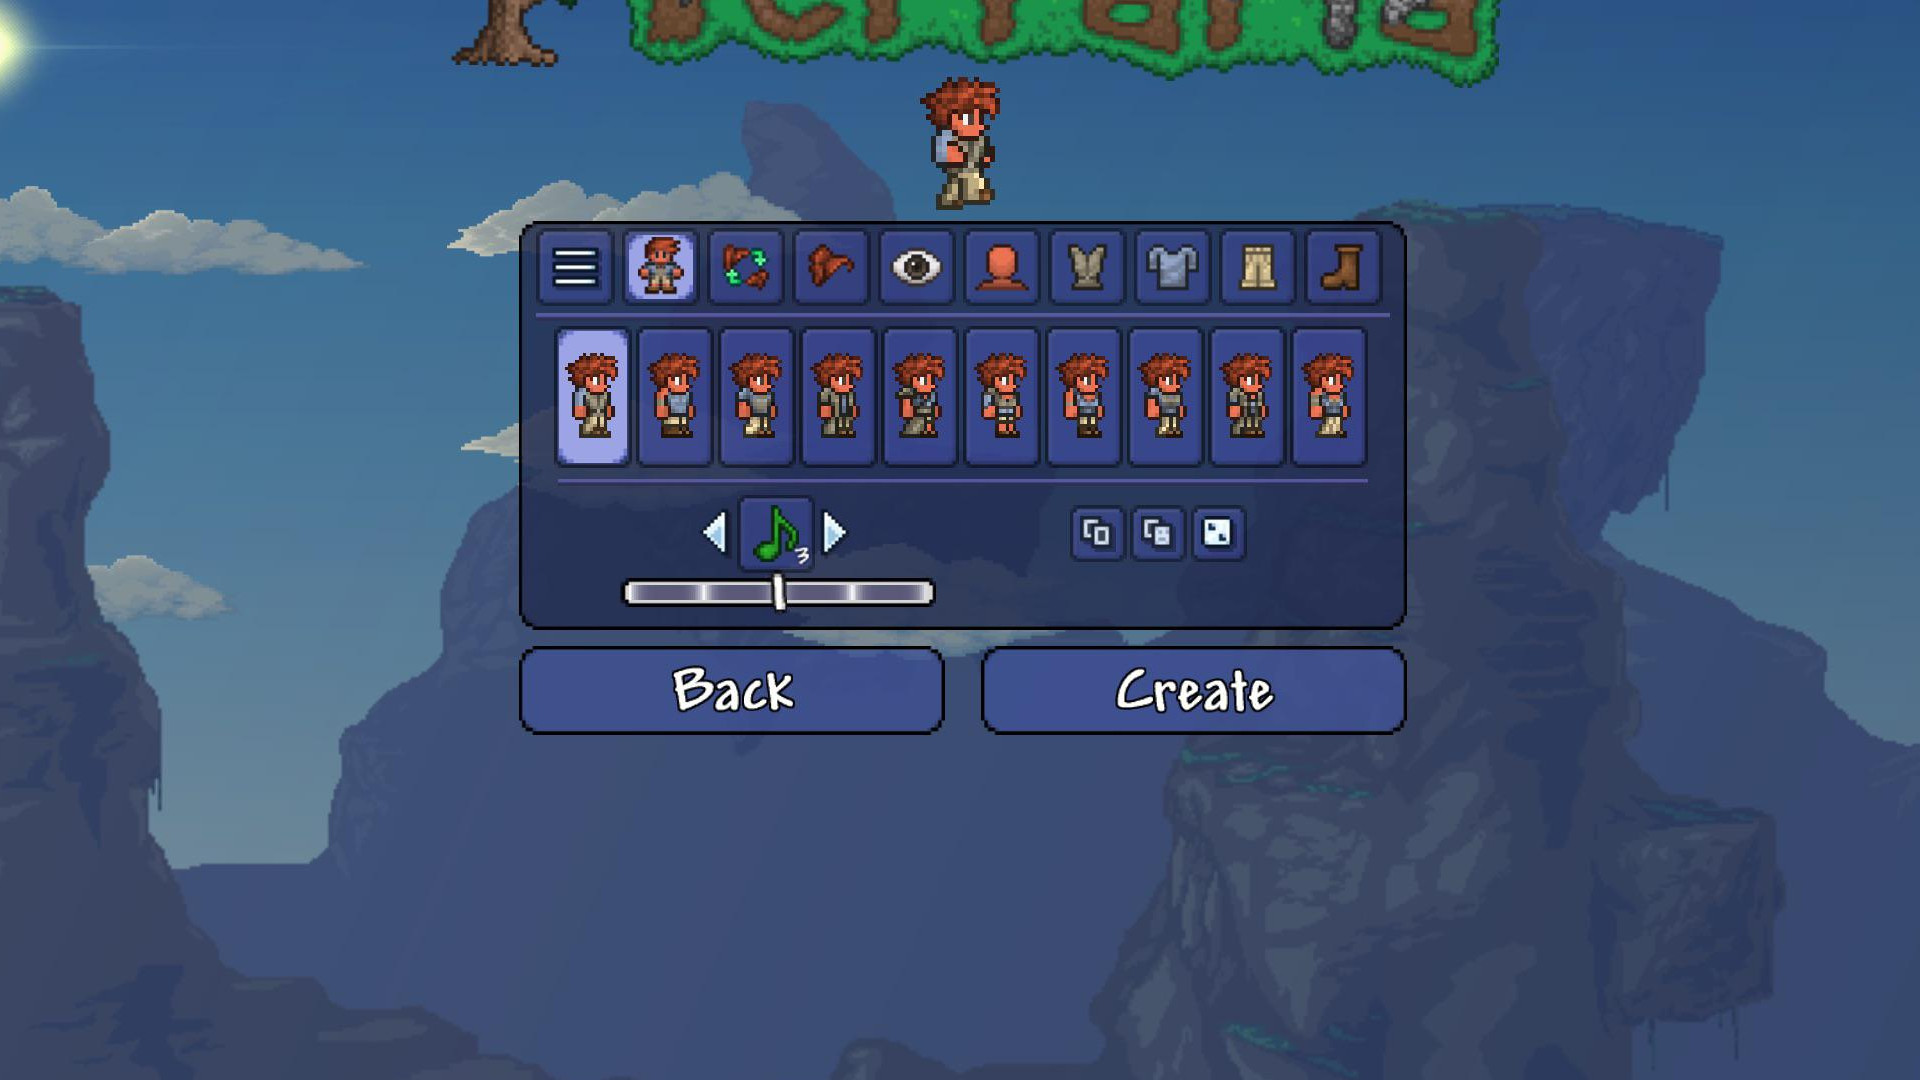 Everything About ALL New Secret World Seeds in Terraria 1.4.4